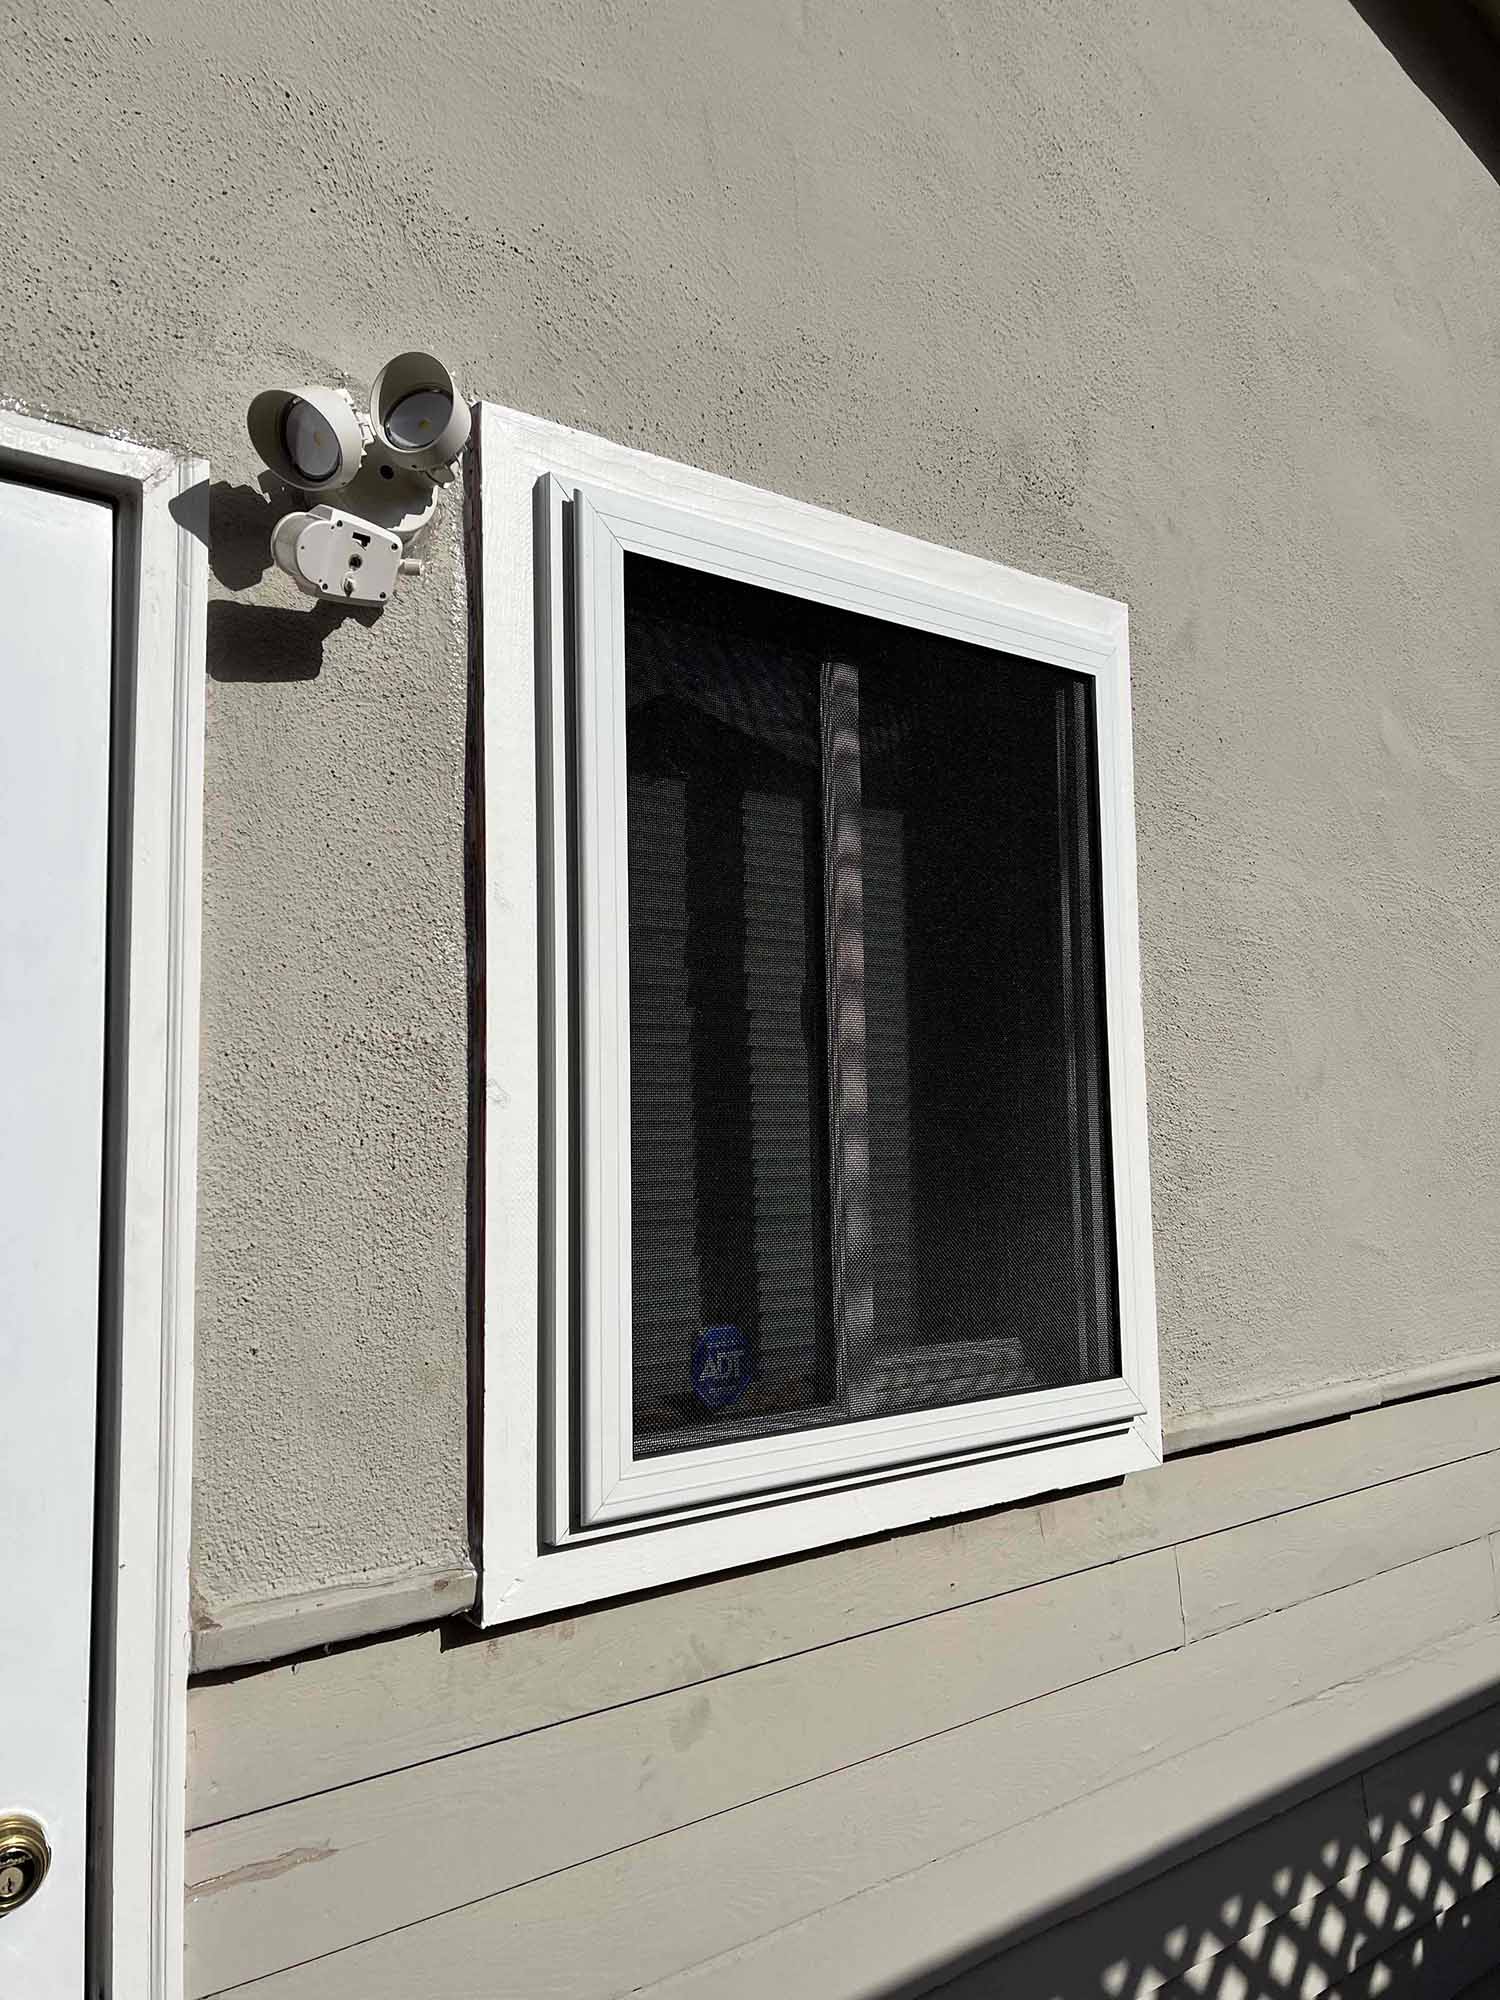 Safety Window Film for Sunnyvale, CA Homes. Installed by ClimatePro.